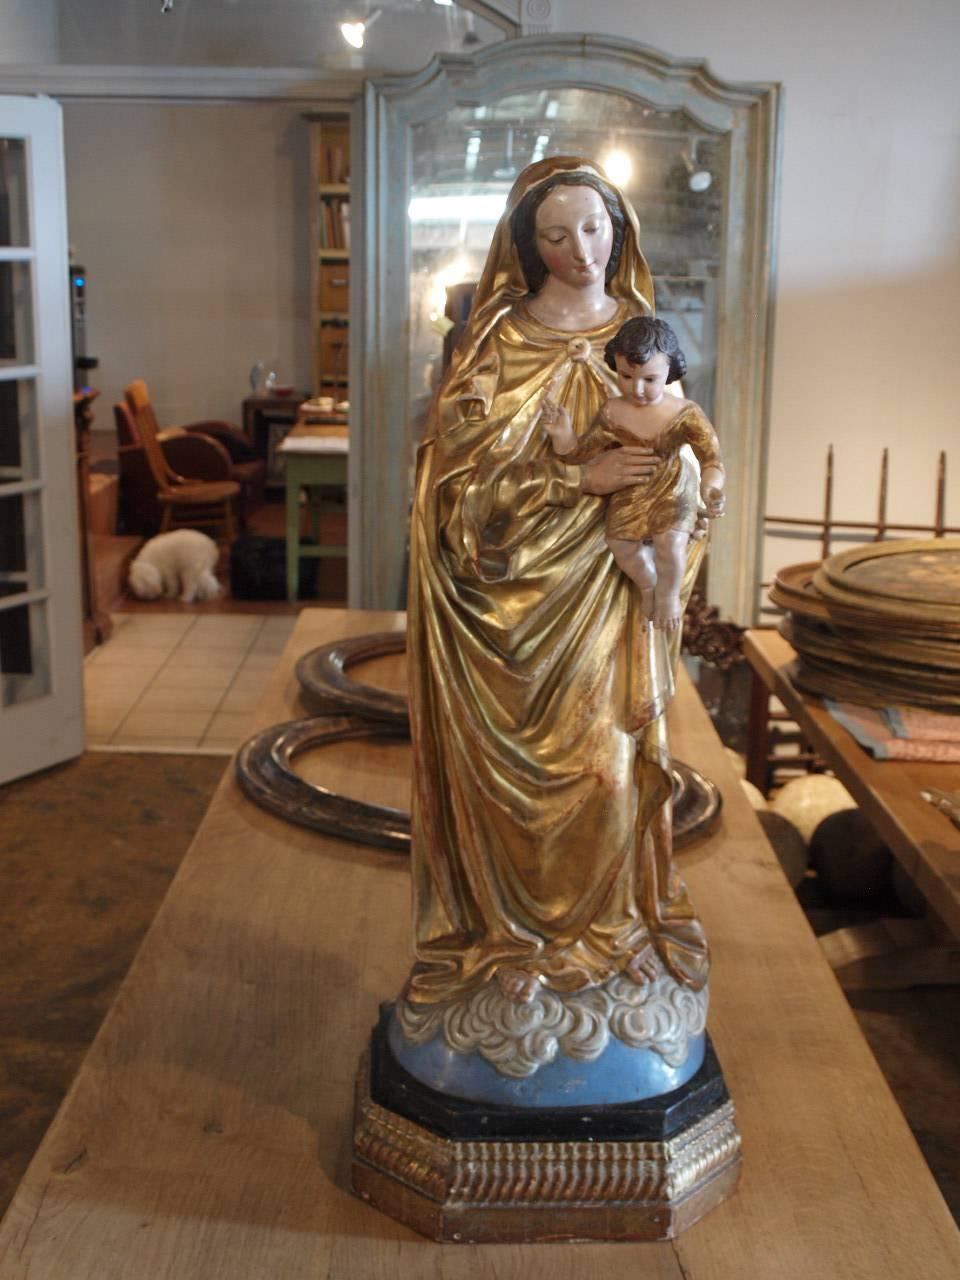 A very beautiful later 19th century statue of the Madonna and Child in polychromed and giltwood and papier mâché. Exquisite features and brilliant color.